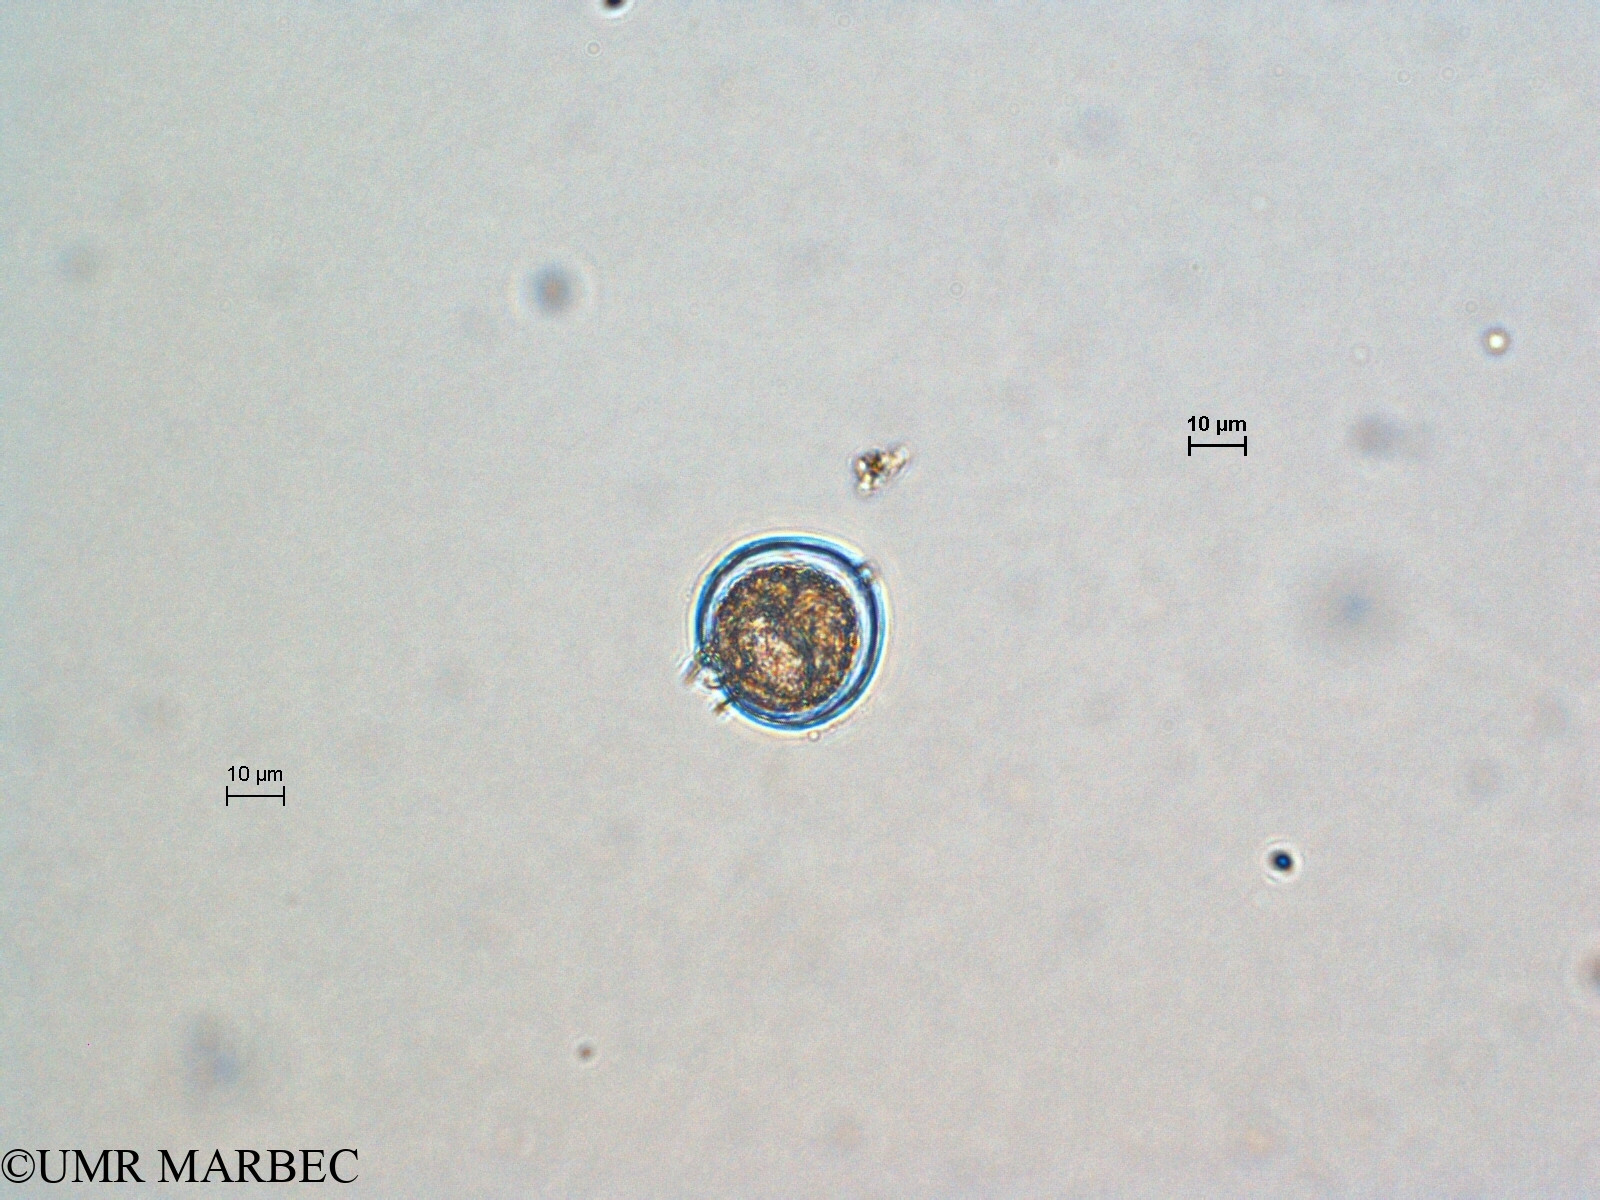 phyto/Scattered_Islands/all/COMMA April 2011/Protoperidinium sp51 (ancien Protoperidinium sp23 -ancien Protoperidinium sp9 recomposé)(copy).jpg